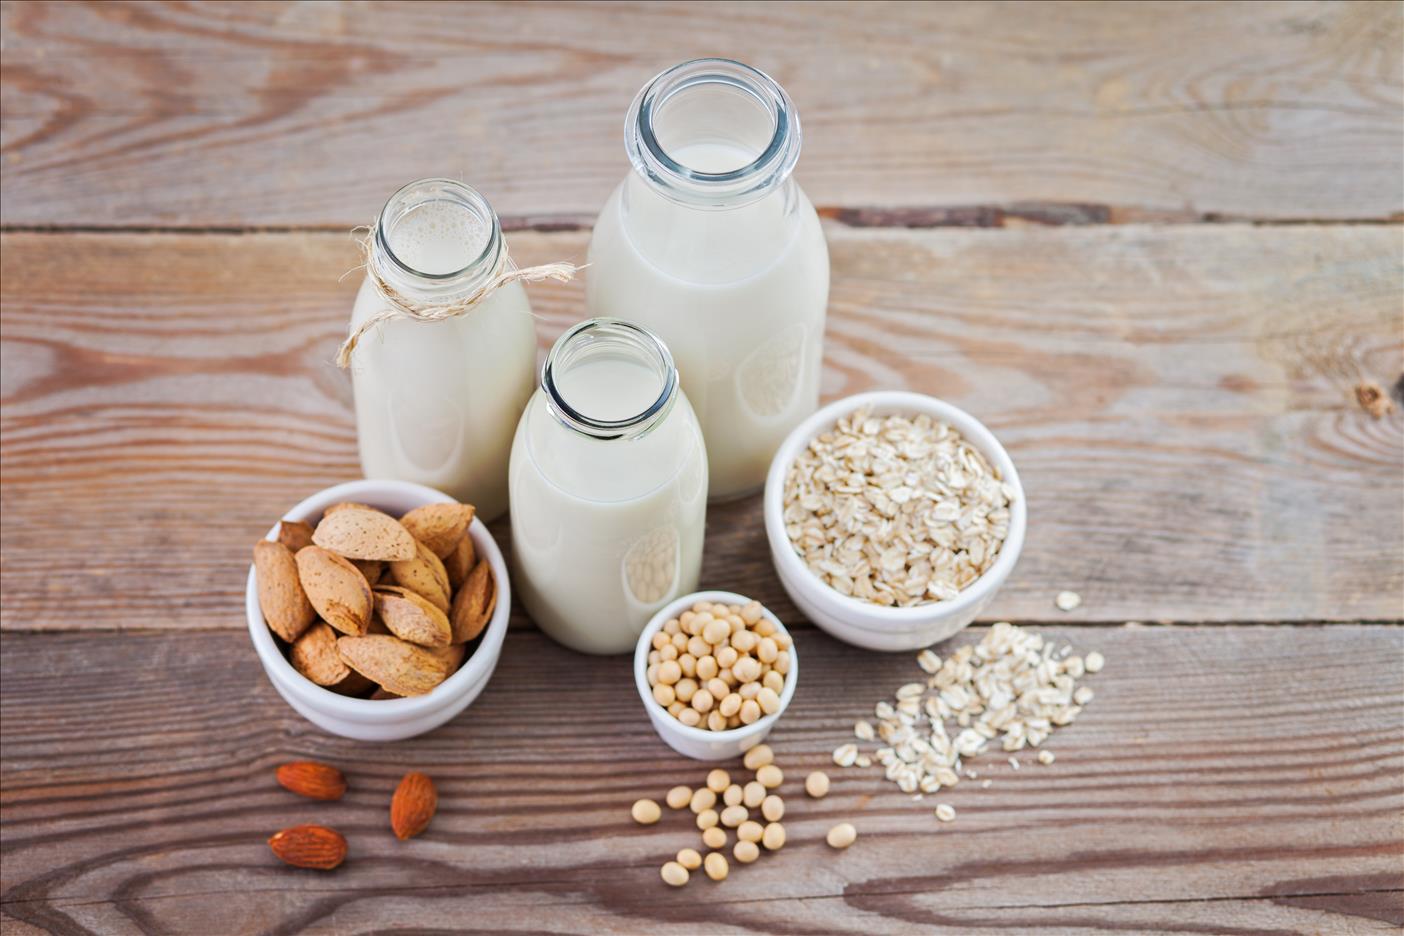 Plant-Based Milk Products: What To Consider When Purchasing Them